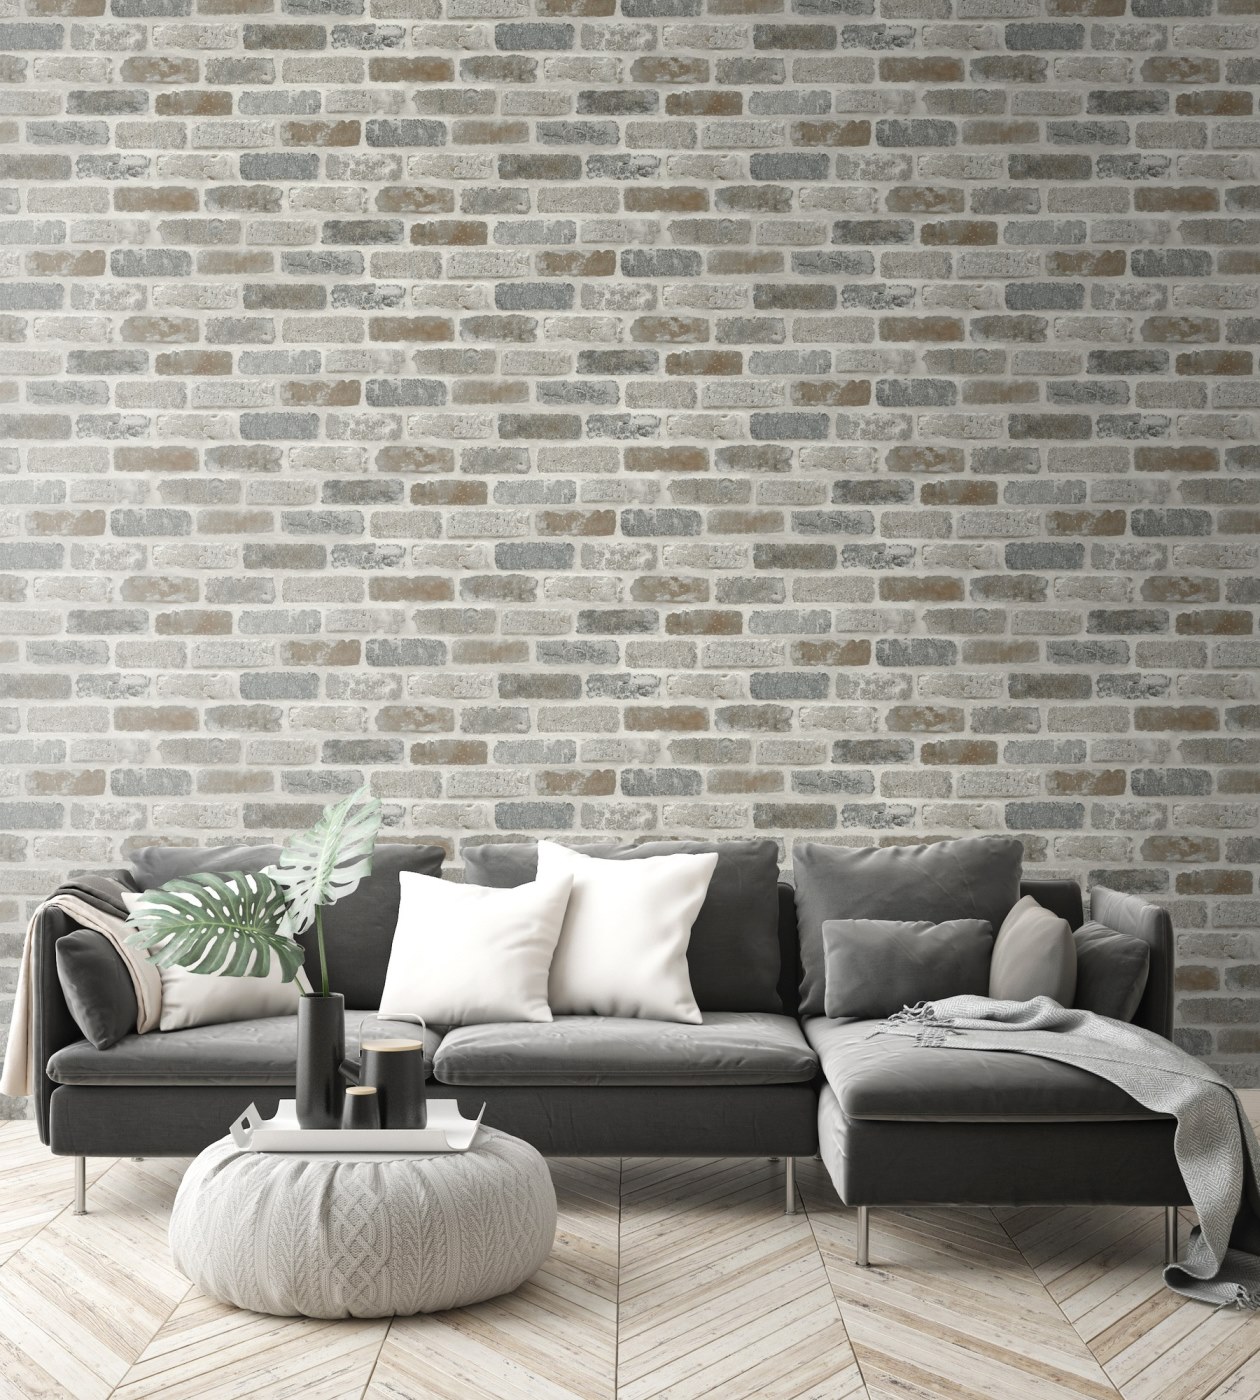 Buy Glowvia White Bricks Wallpaper for Wall Modern White Bricks Design  Wallpaper for HomeOfficeLiving RoomHotelCafé Size57 Sqft Online at  Low Prices in India  Amazonin